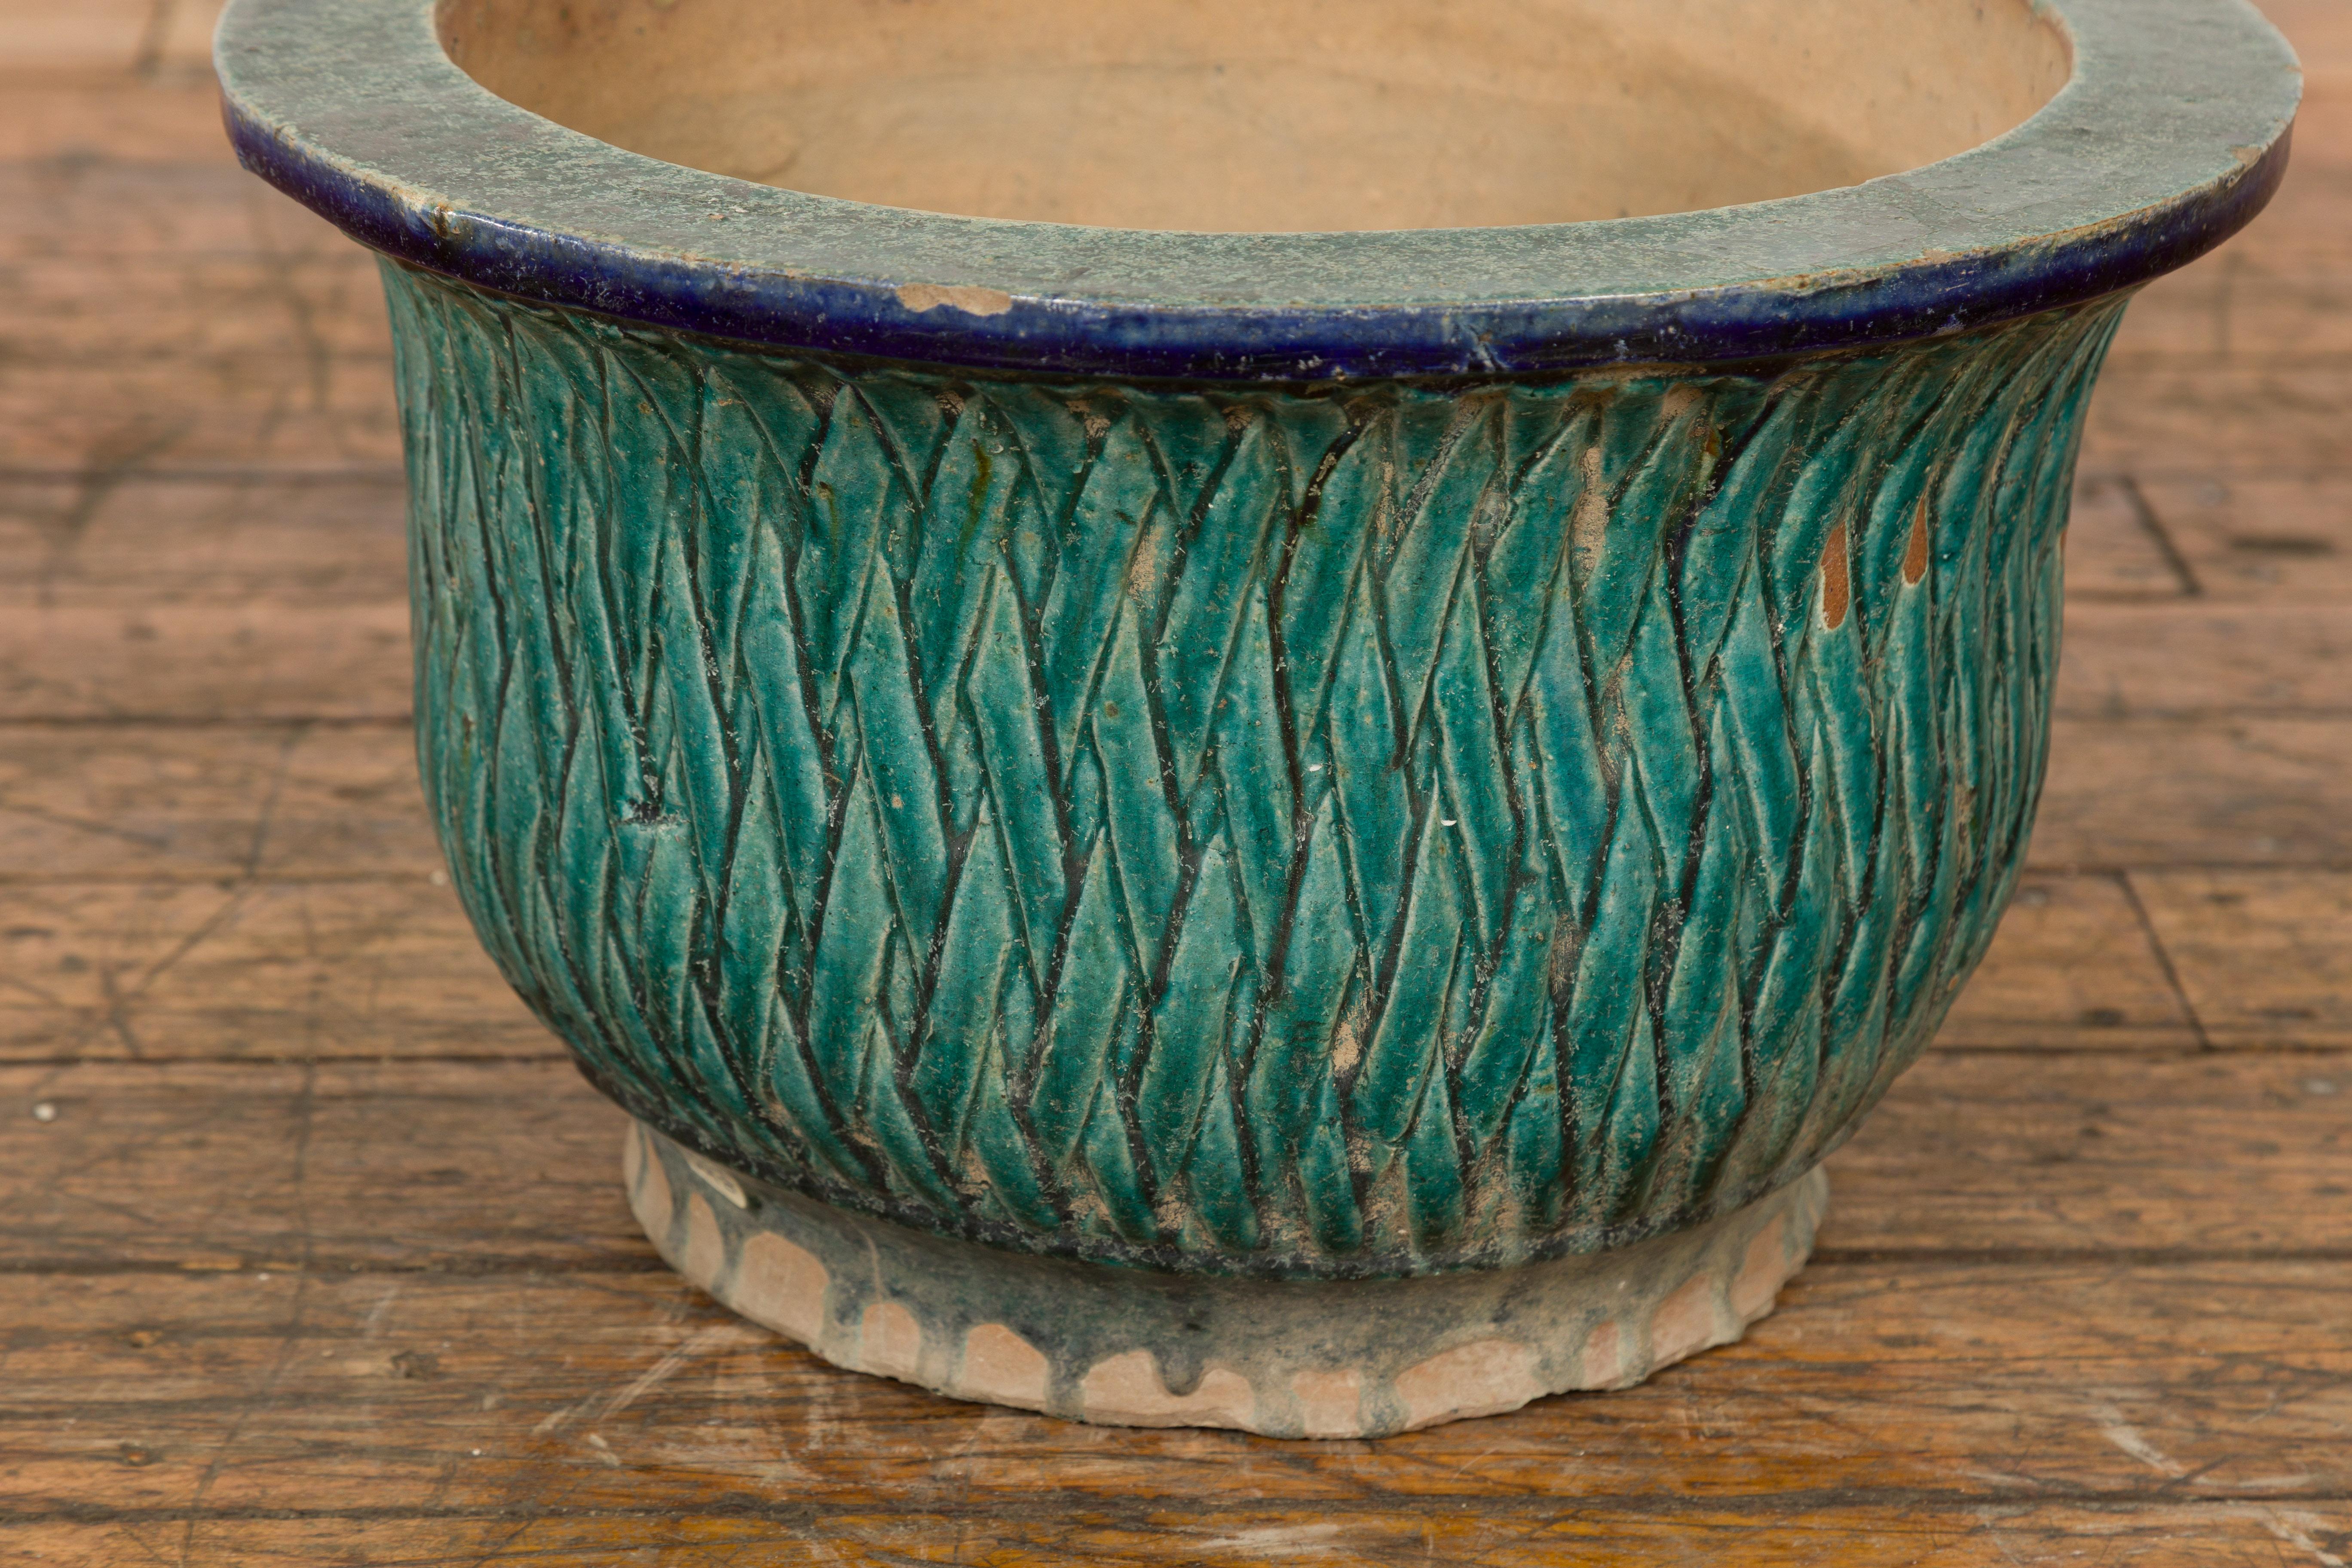 19th Century Multi-Glaze Planter with Green and Blue Accents, Qing Dynasty Period For Sale